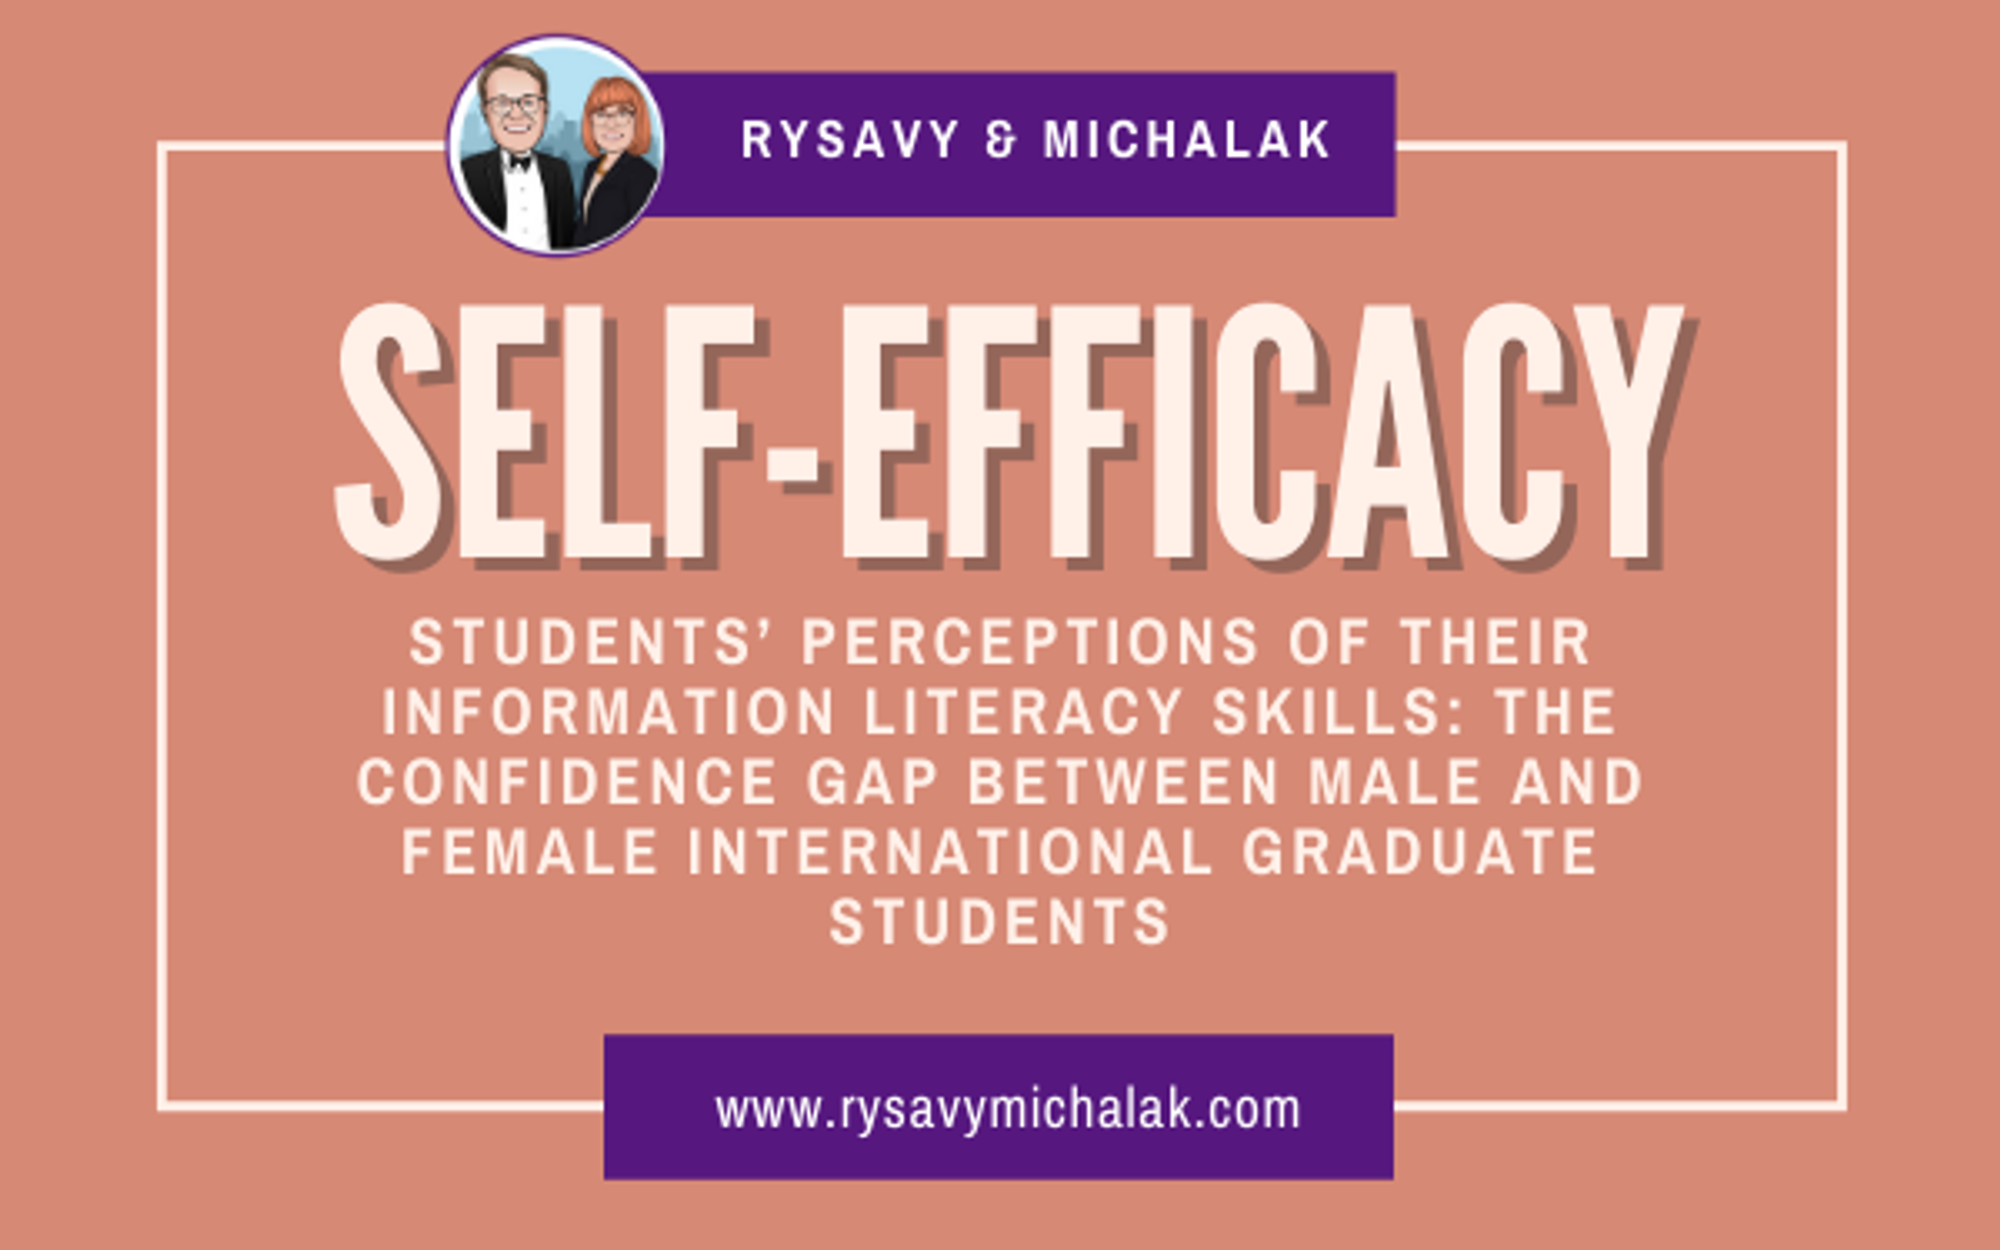 Studentsâ€™ perceptions of their information literacy skills: the confidence gap between male and female international graduate students